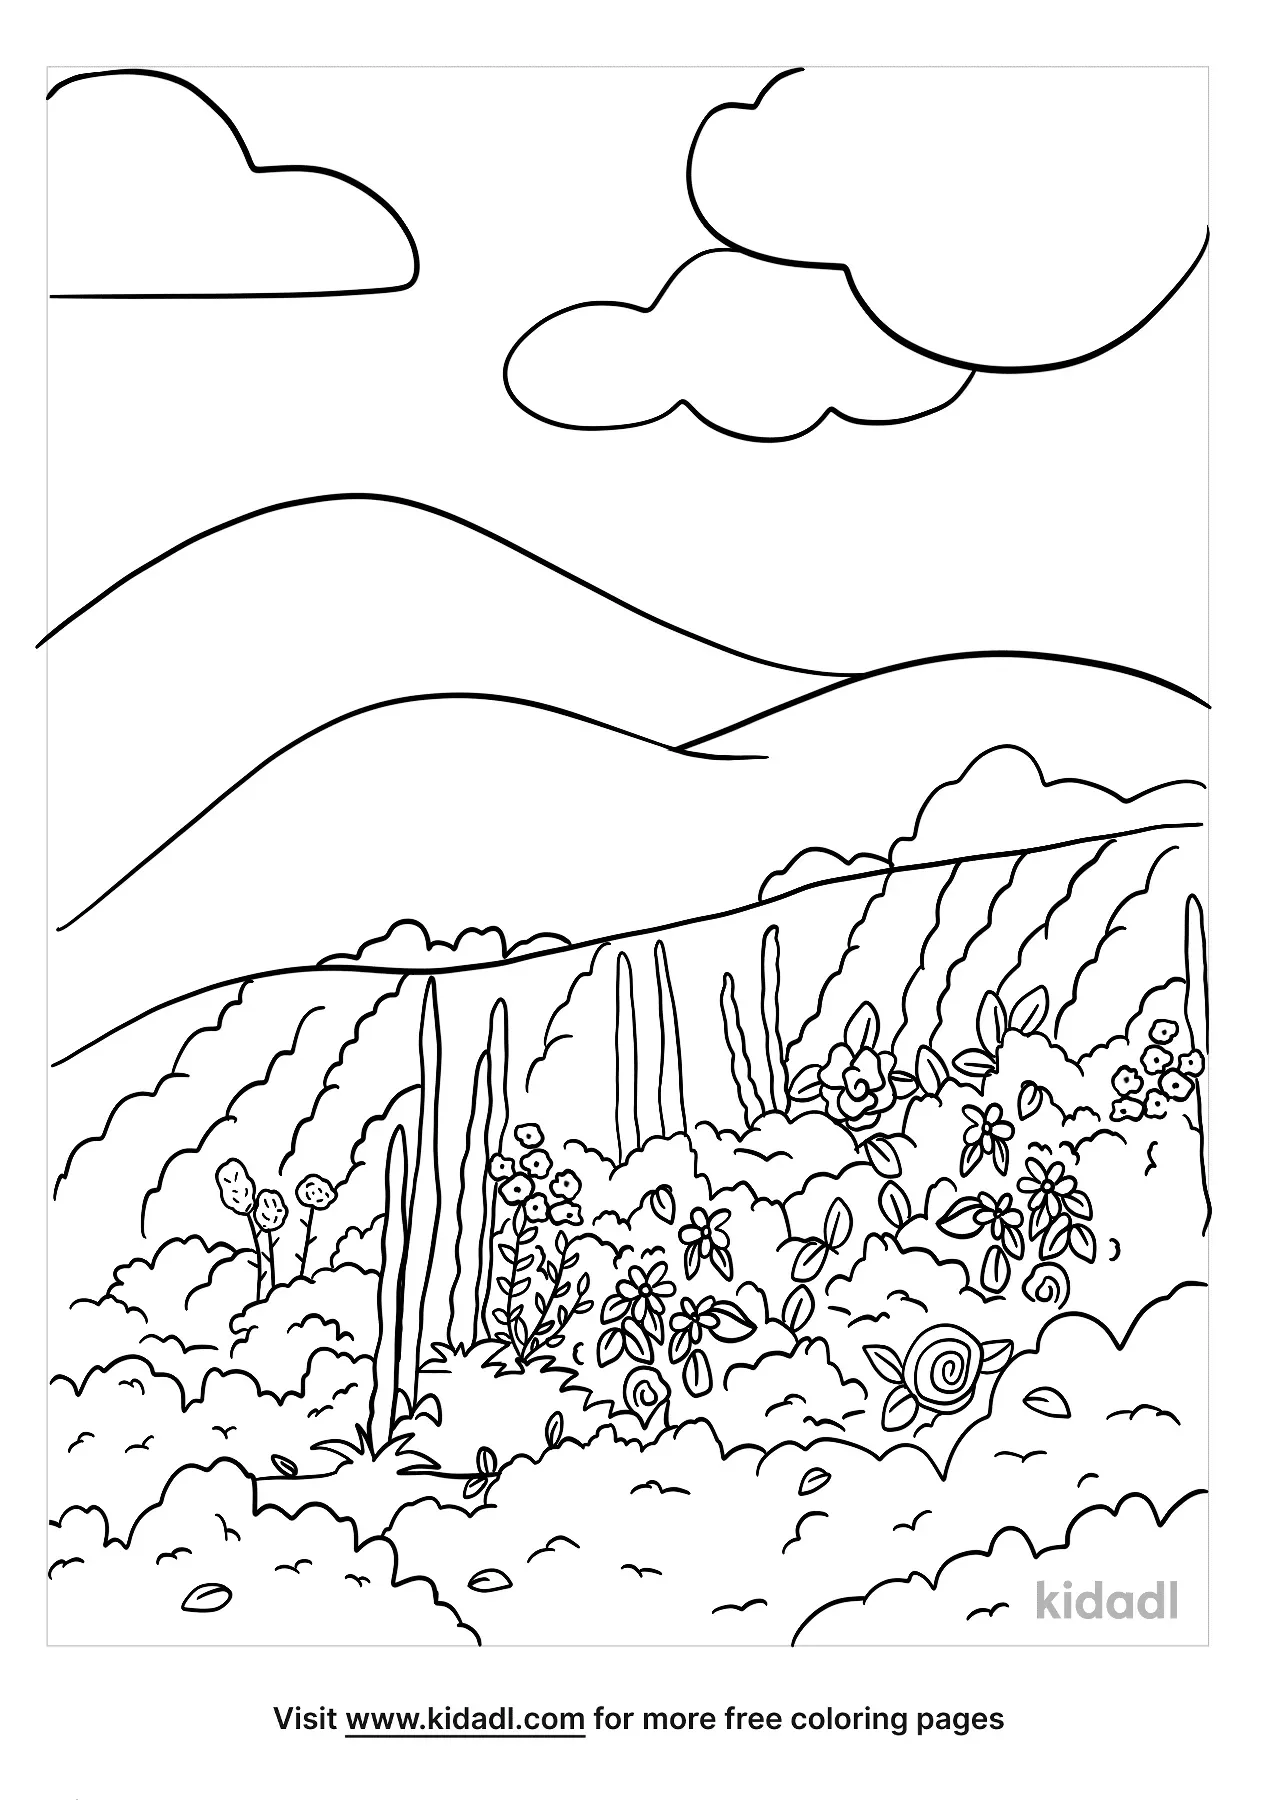 Mount Everest Coloring Page | Free Mountains Coloring Page | Kidadl